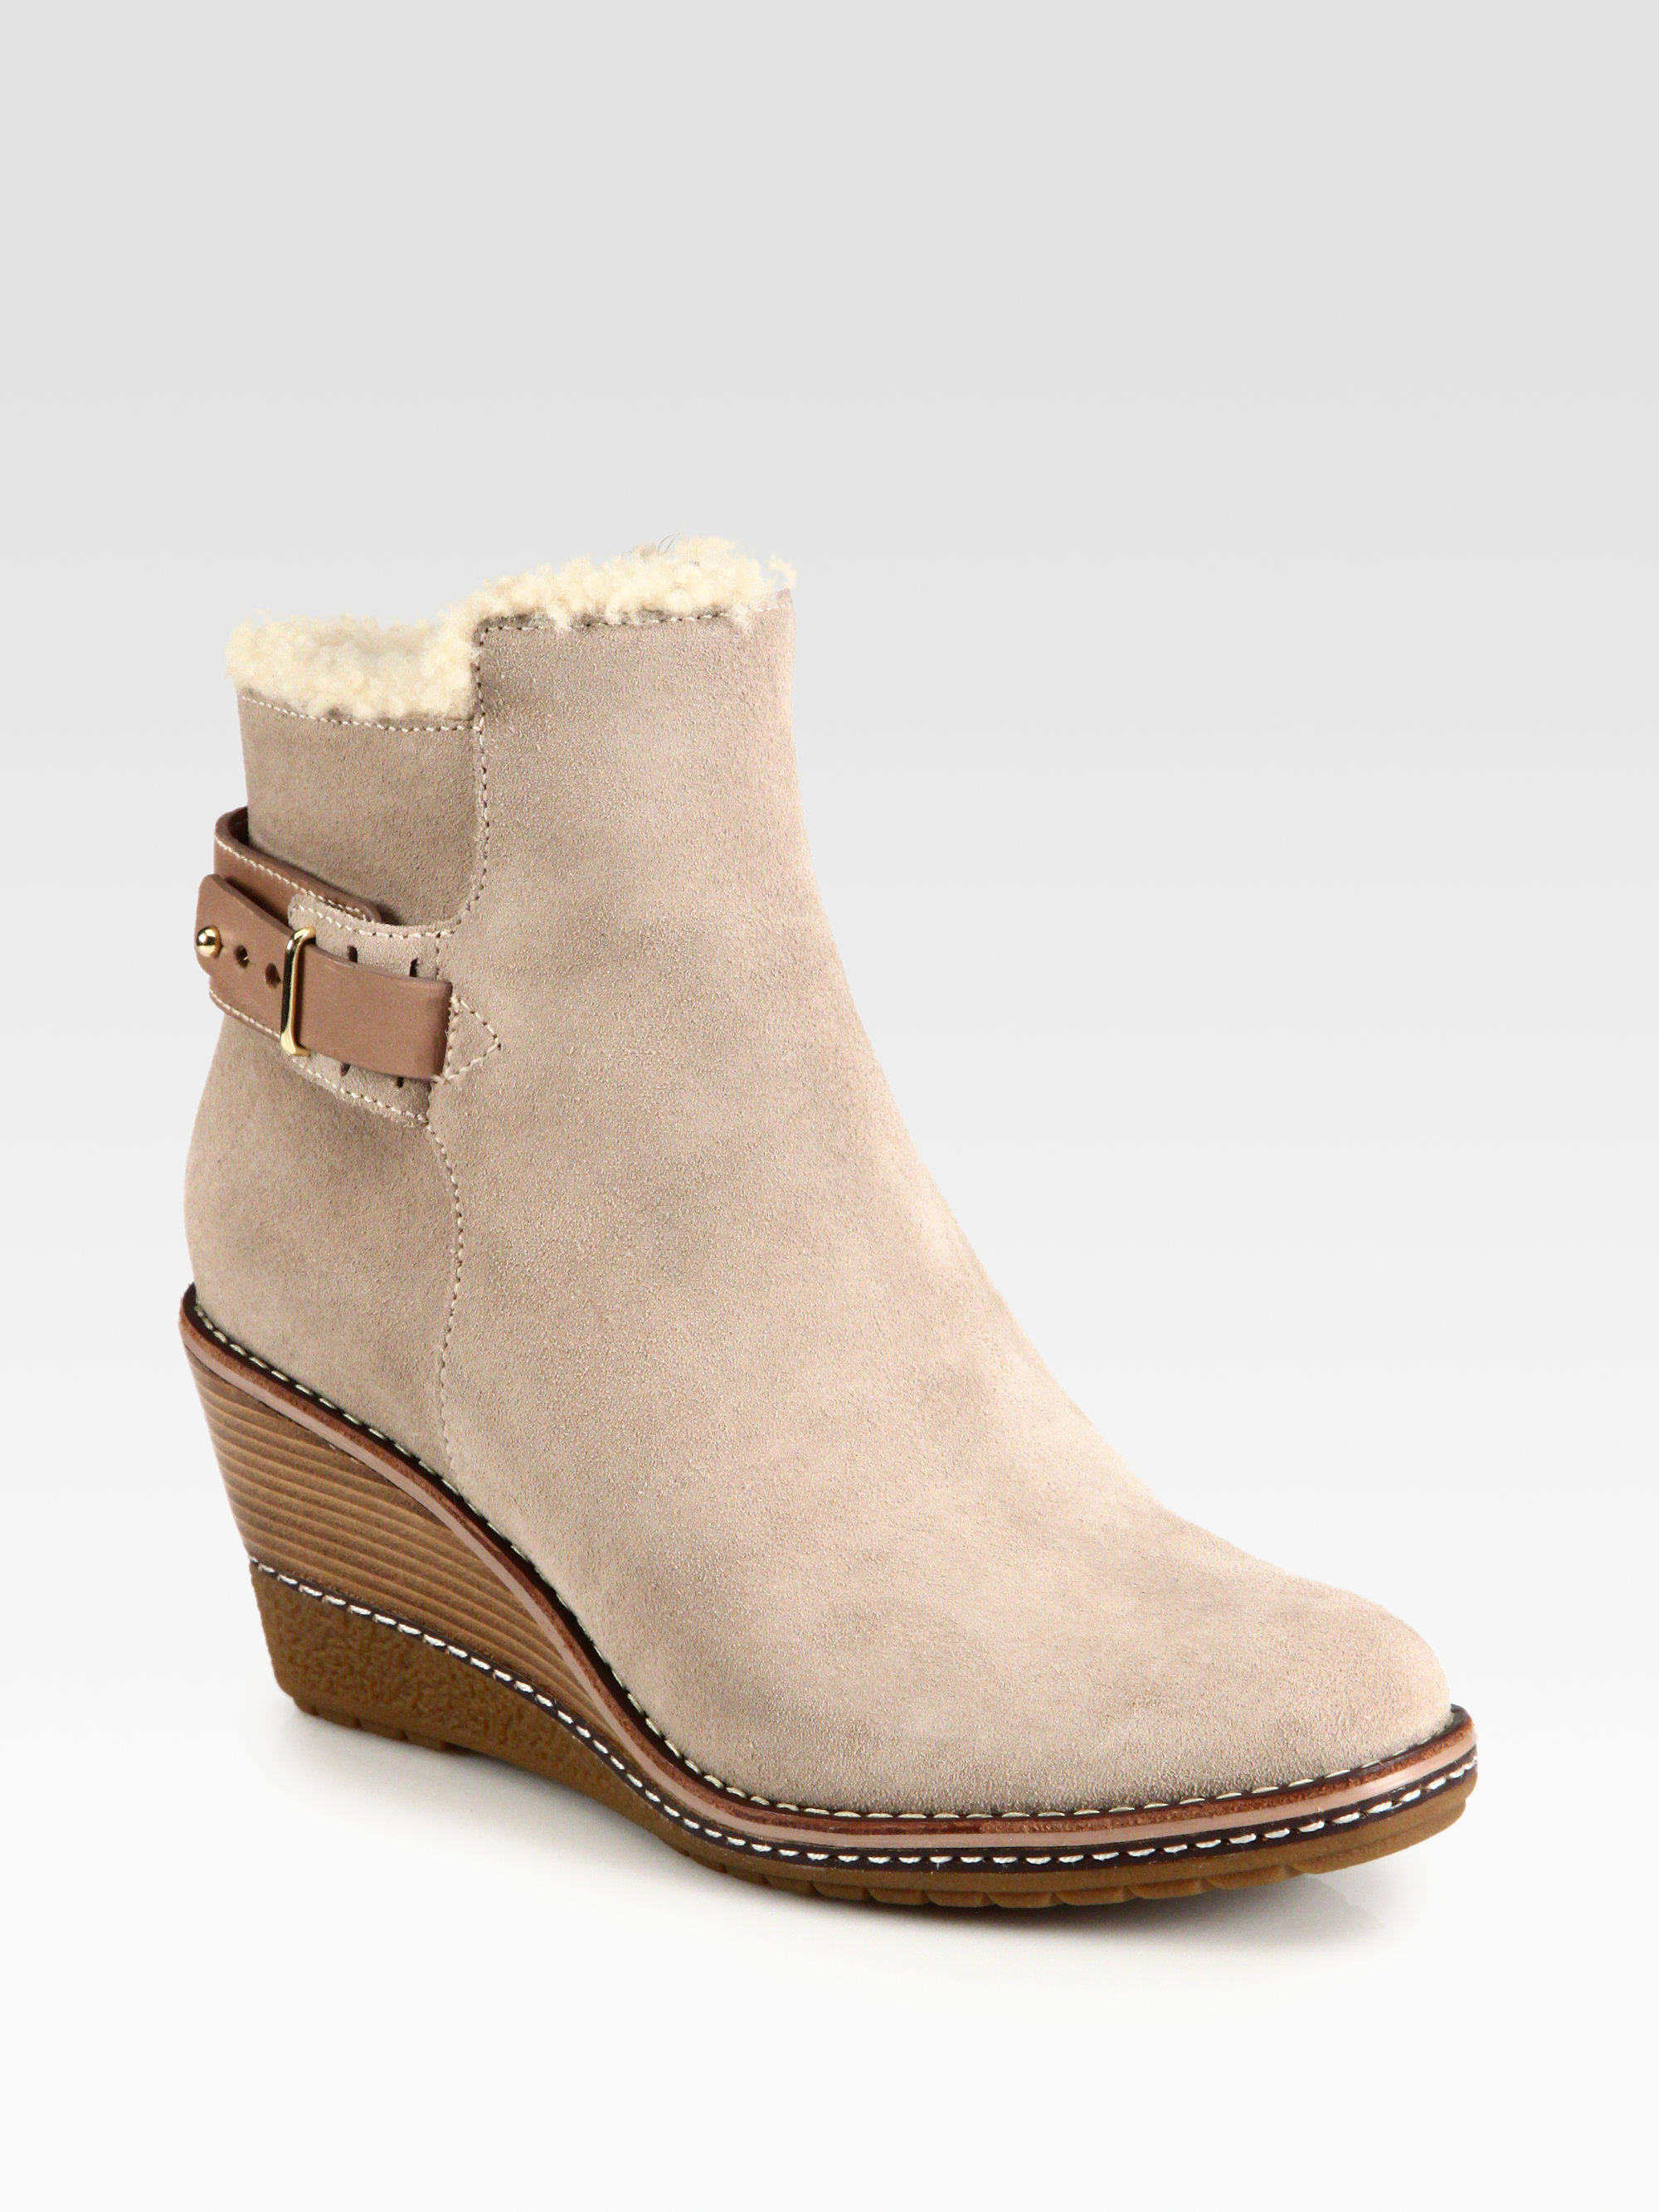 Cole Haan Rayna Shearlinglined Suede Wedge Ankle Boots in Beige ...